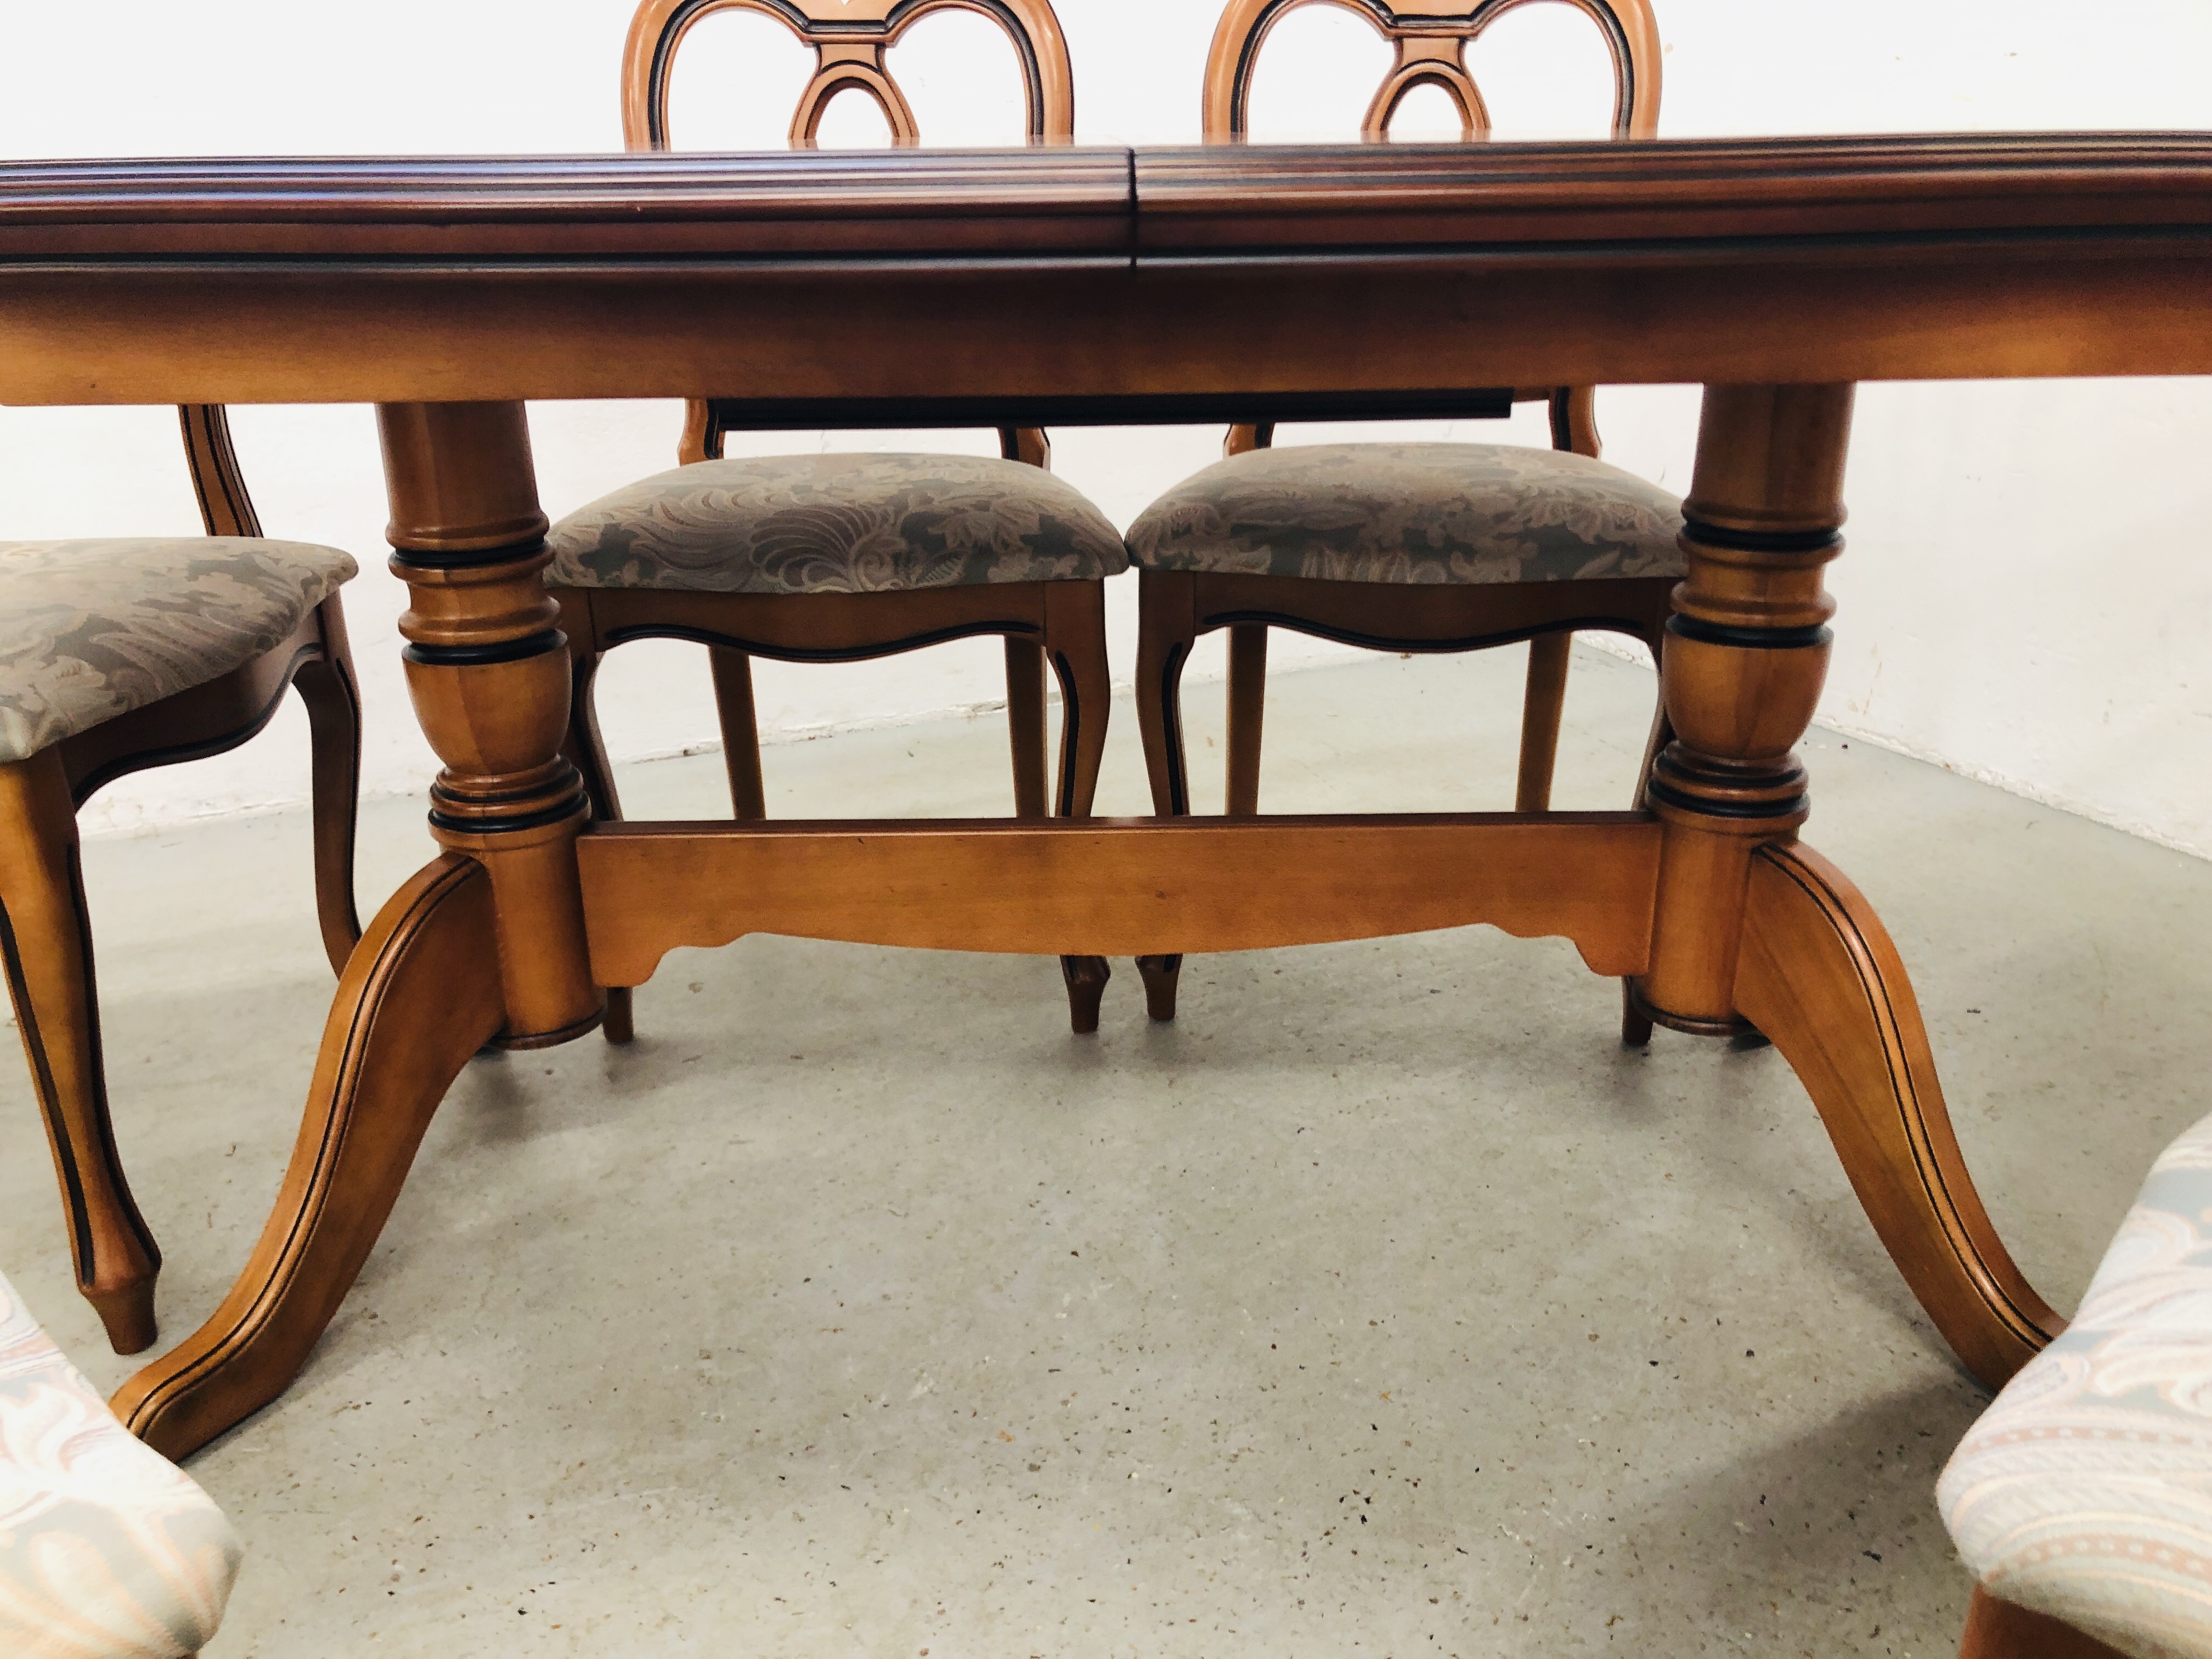 A GOOD QUALITY REPRODUCTION EXTENDING CHERRY WOOD FINISH DINING TABLE COMPLETE WITH A SET OF SIX - Bild 5 aus 6